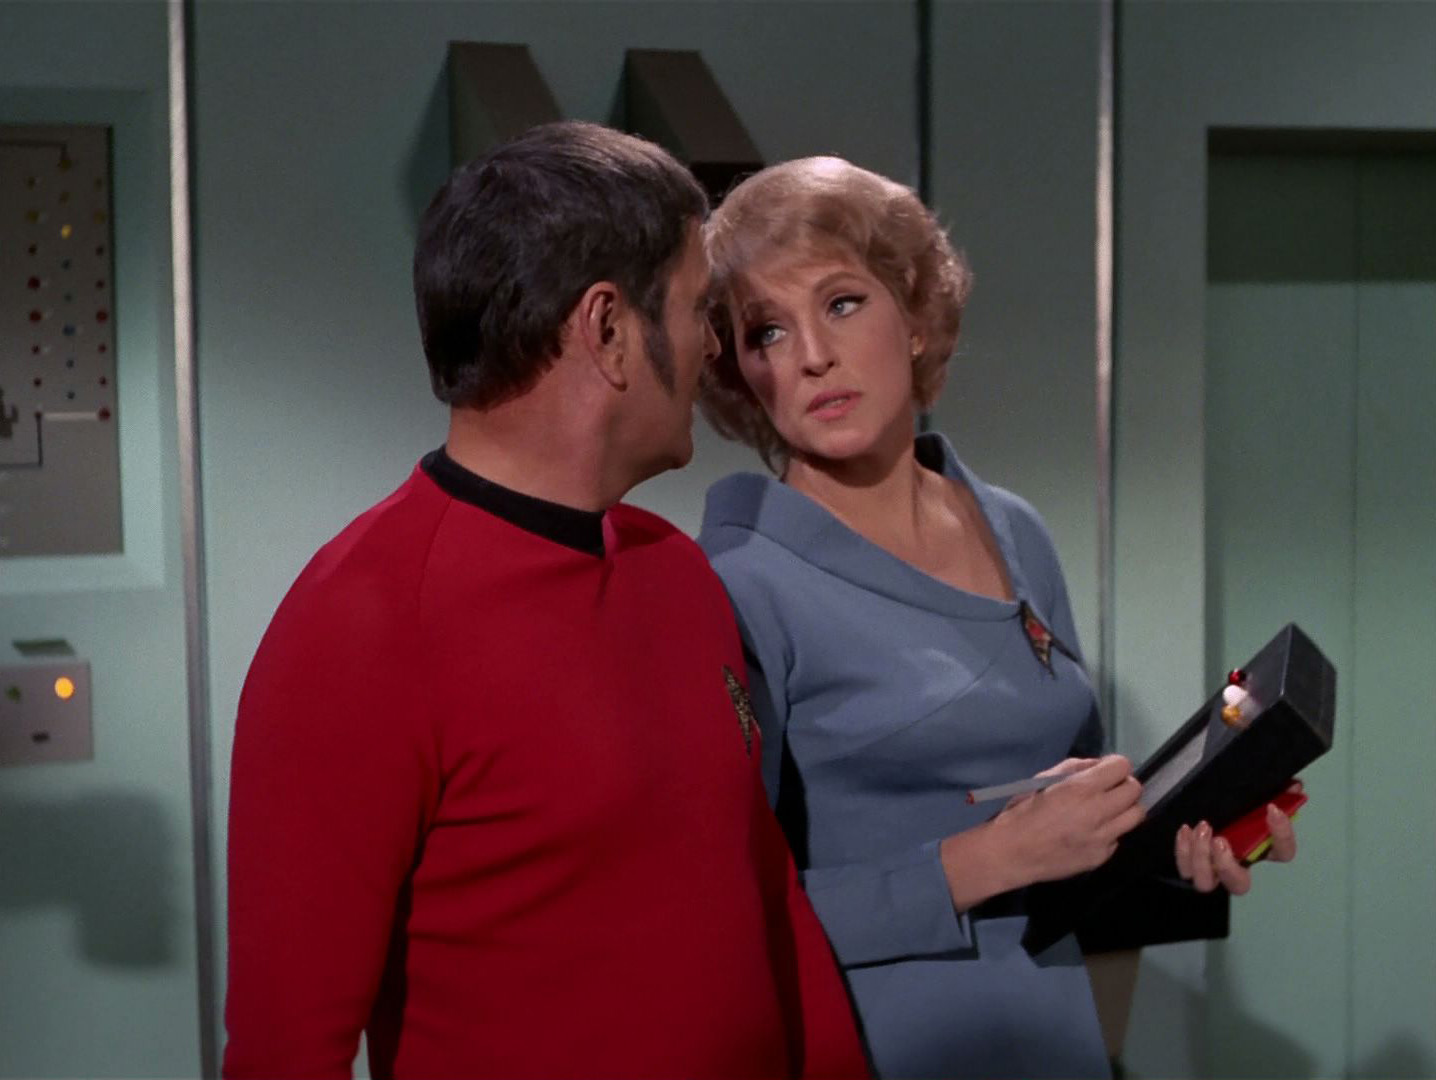 "With a beside manner like that, Scotty, ye're in the wrong business."